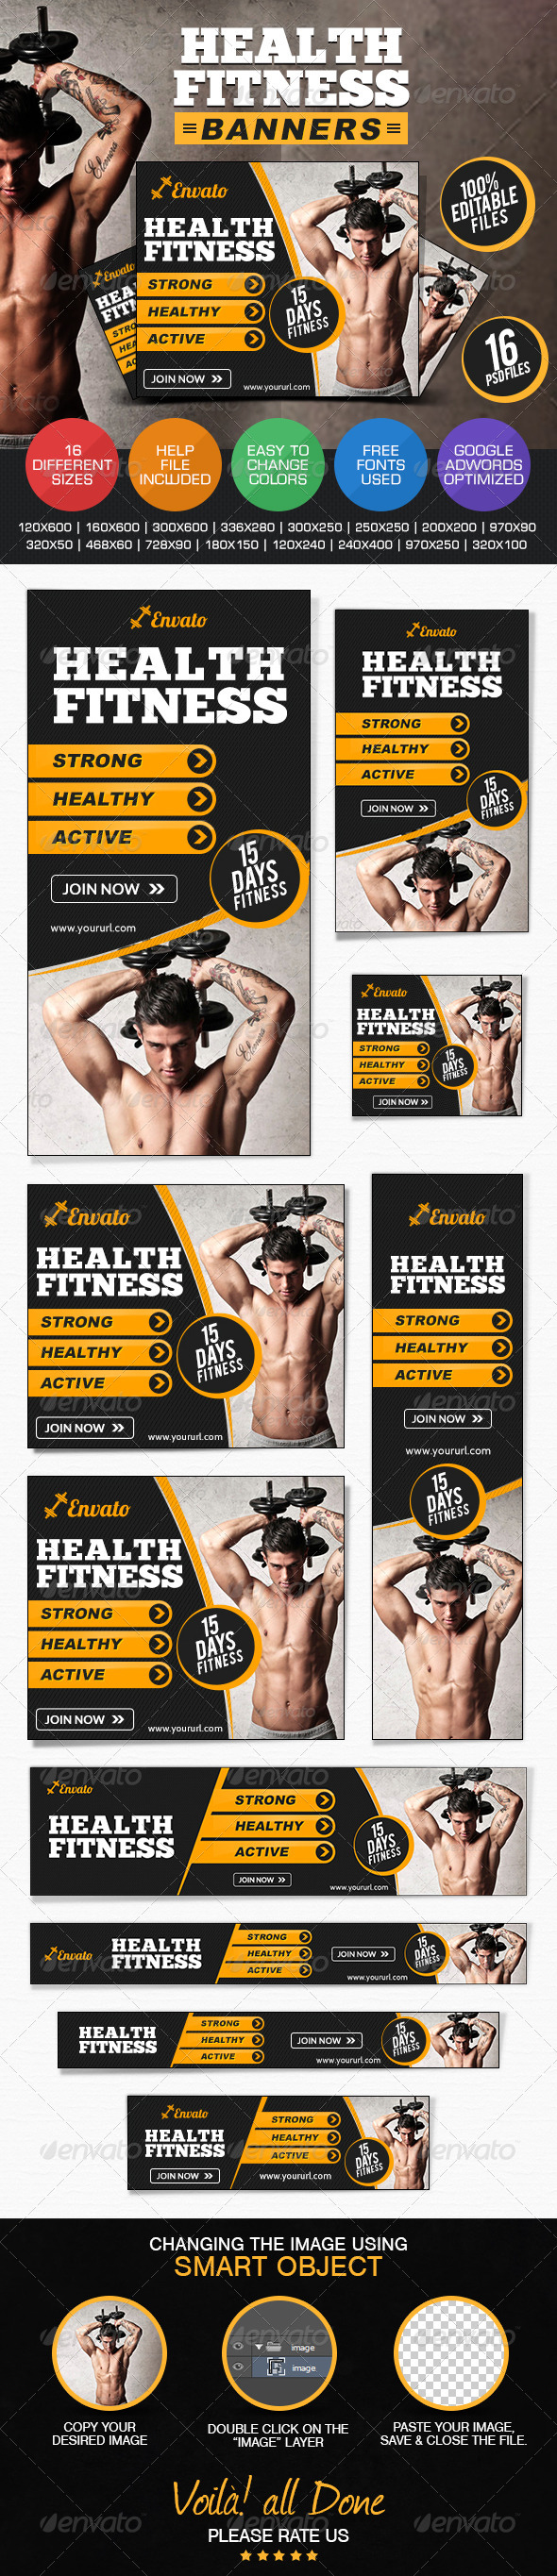 GraphicRiver Health & Fitness Banners 7688647